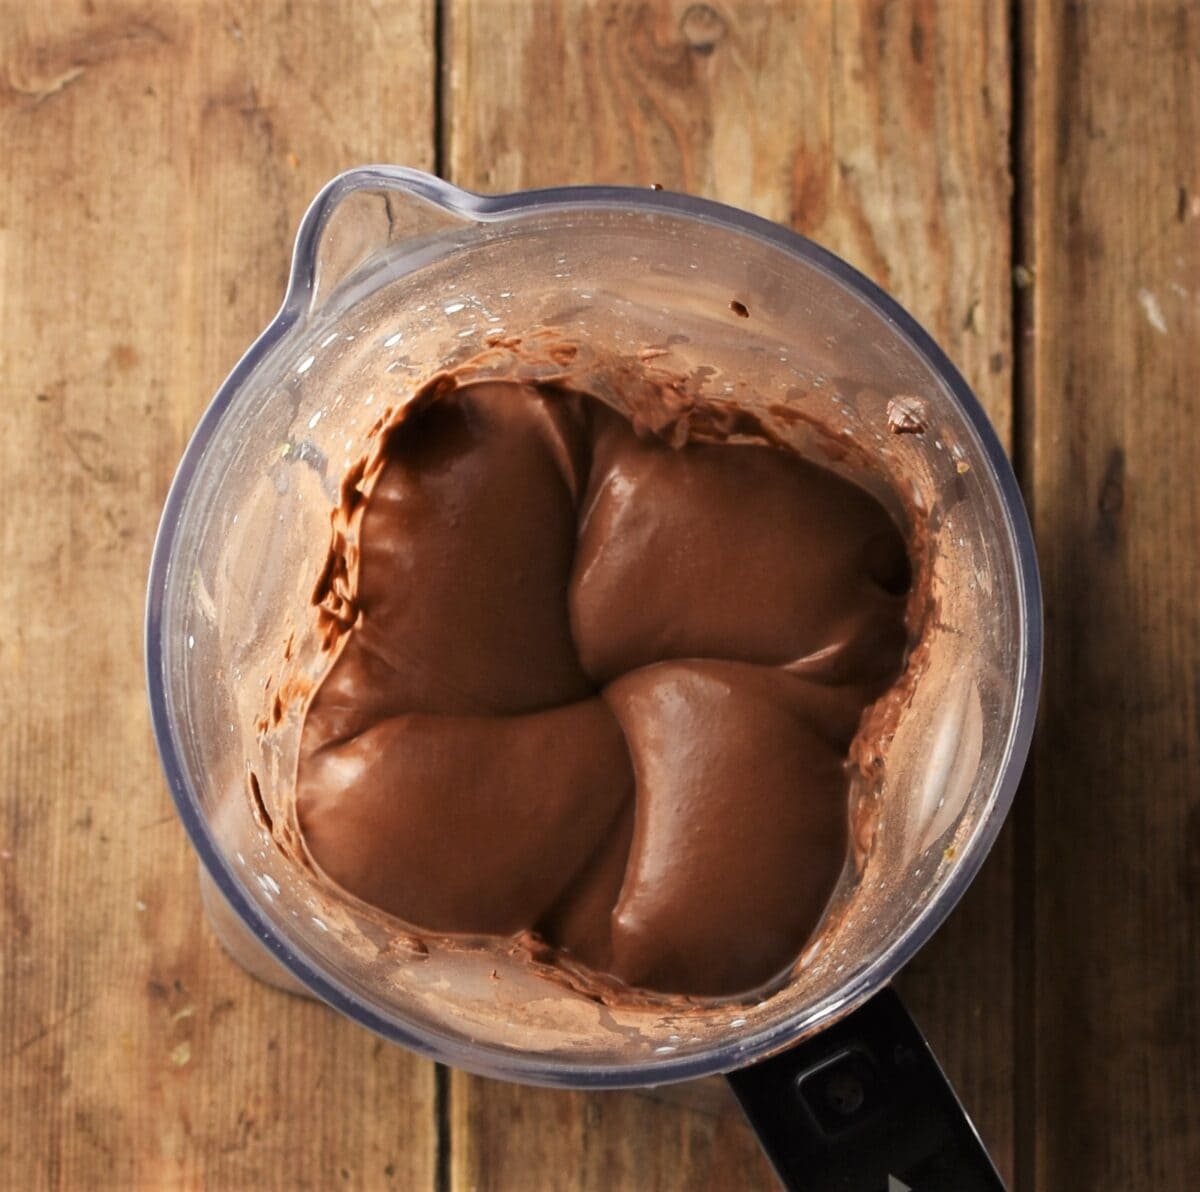 Creamy chocolate mousse mixture in blender.